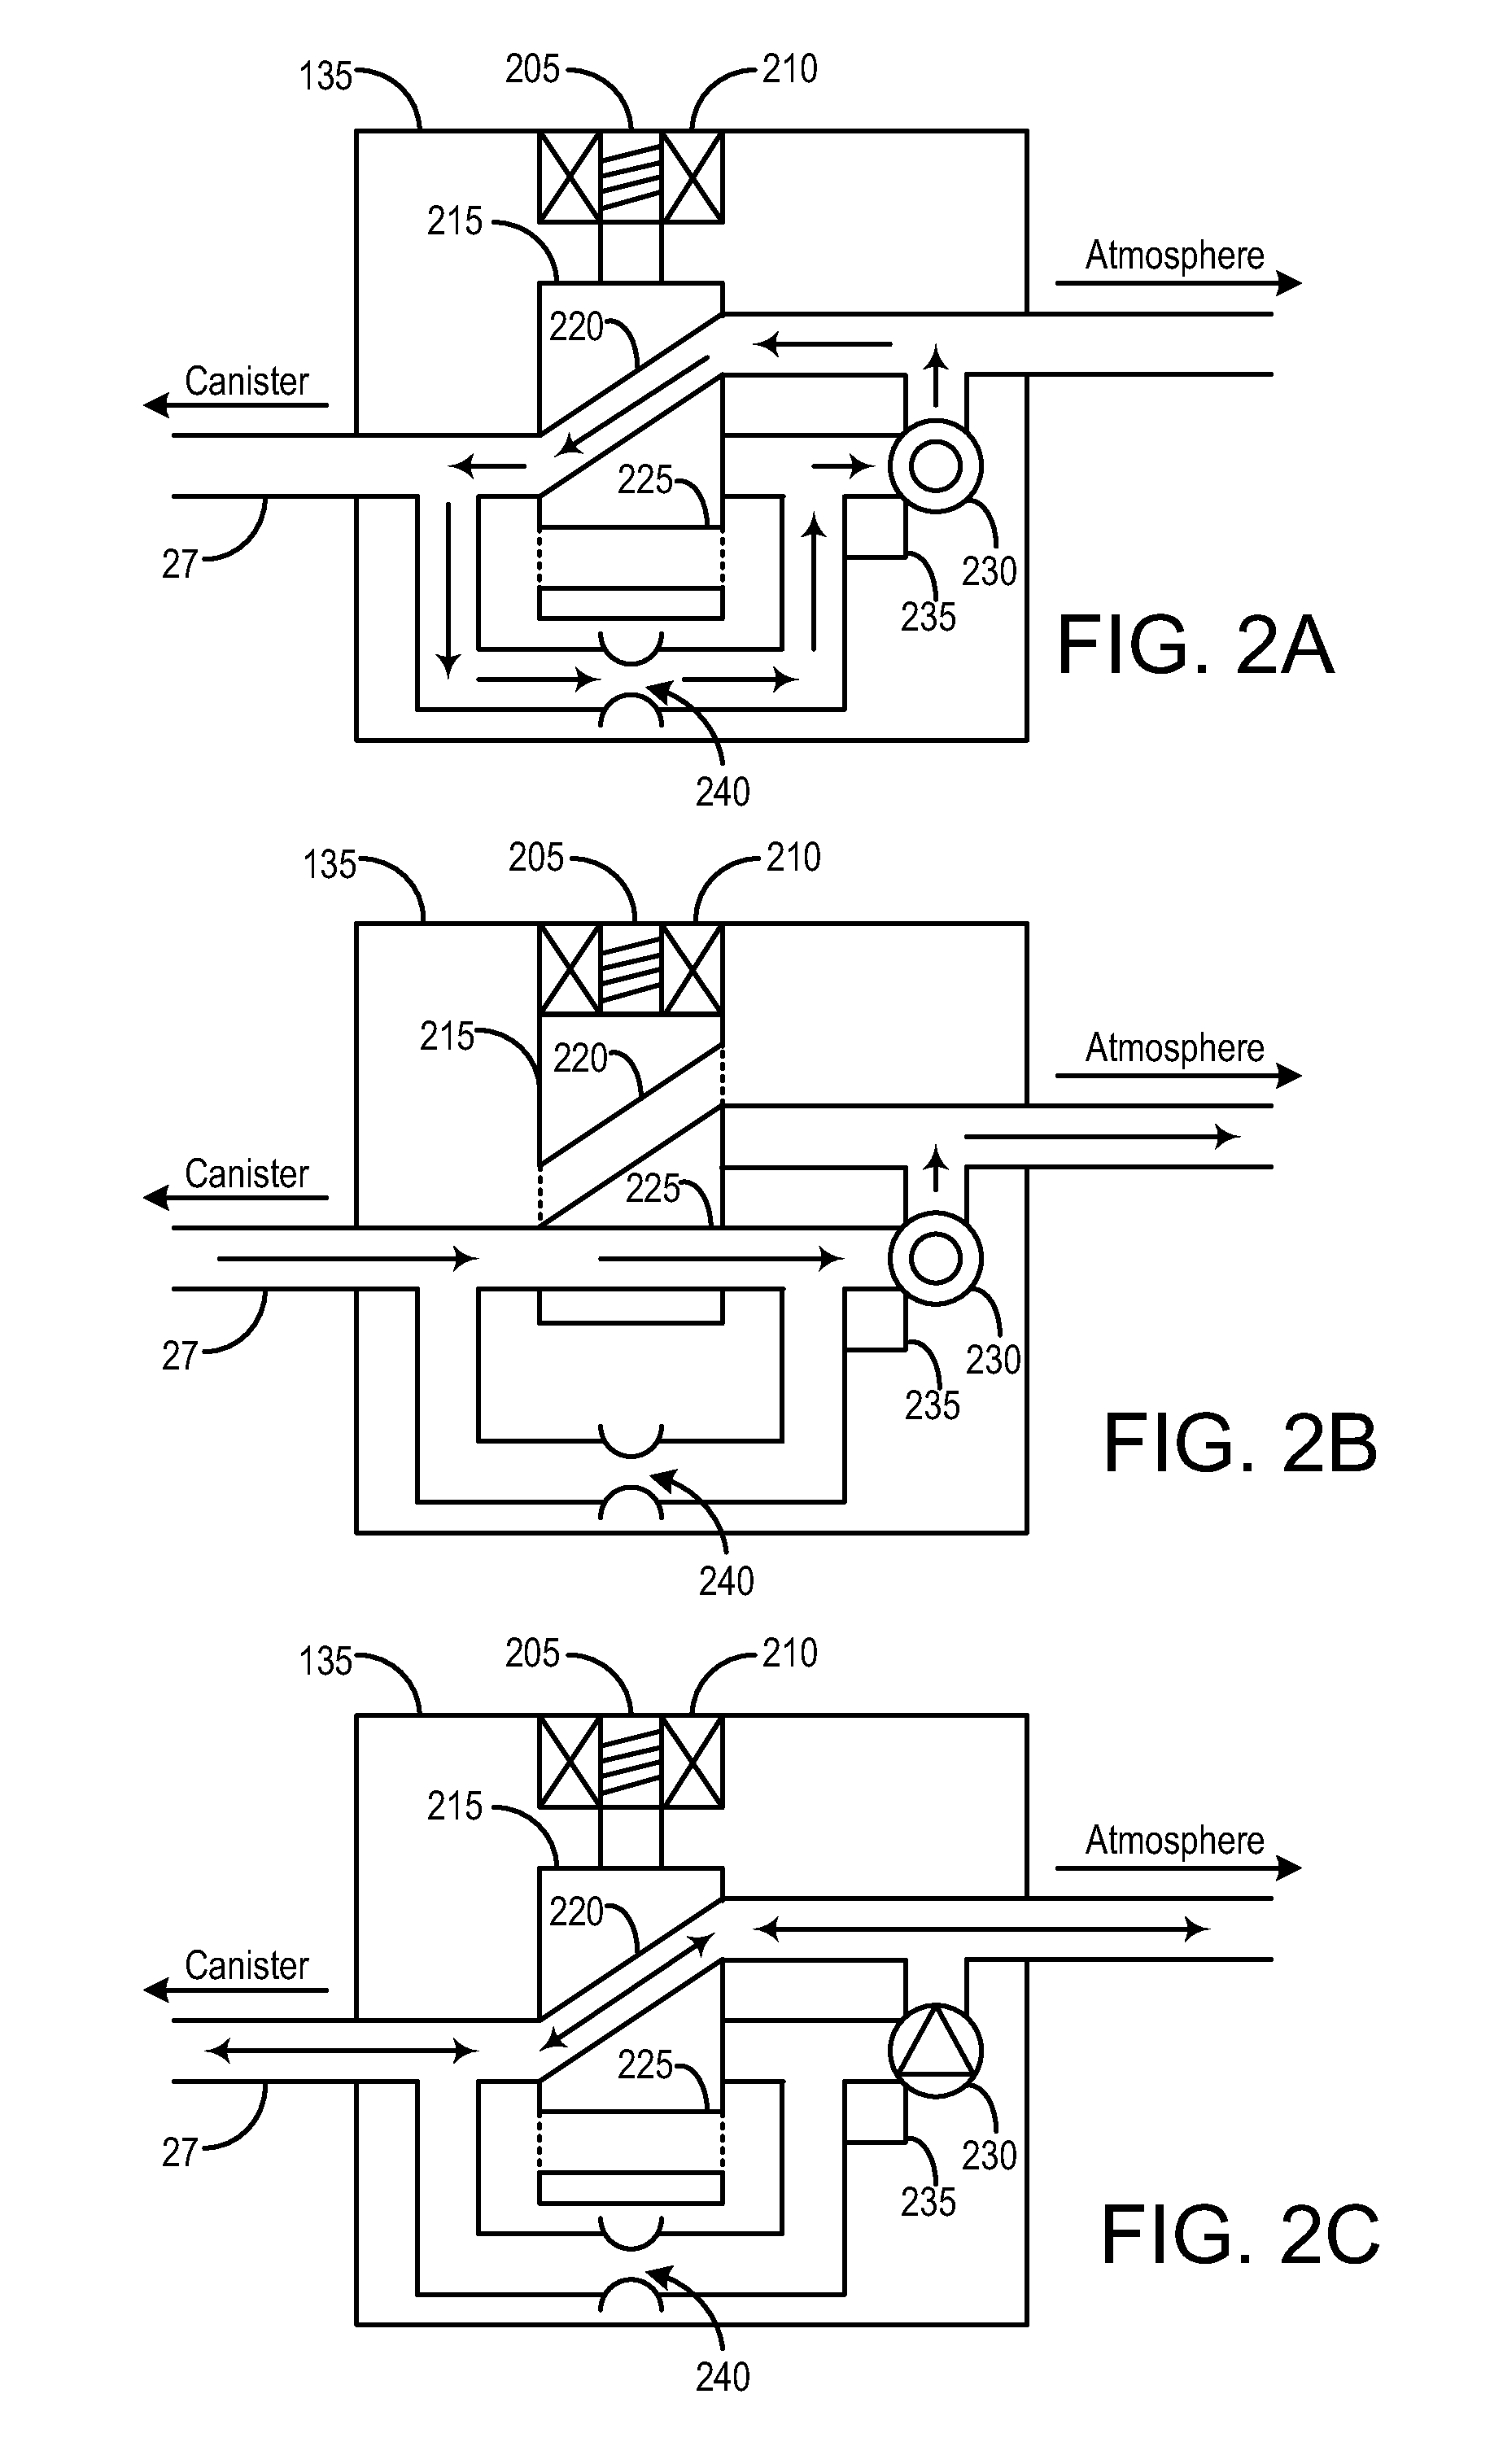 Systems and methods for determining the integrity of a vehicle fuel system